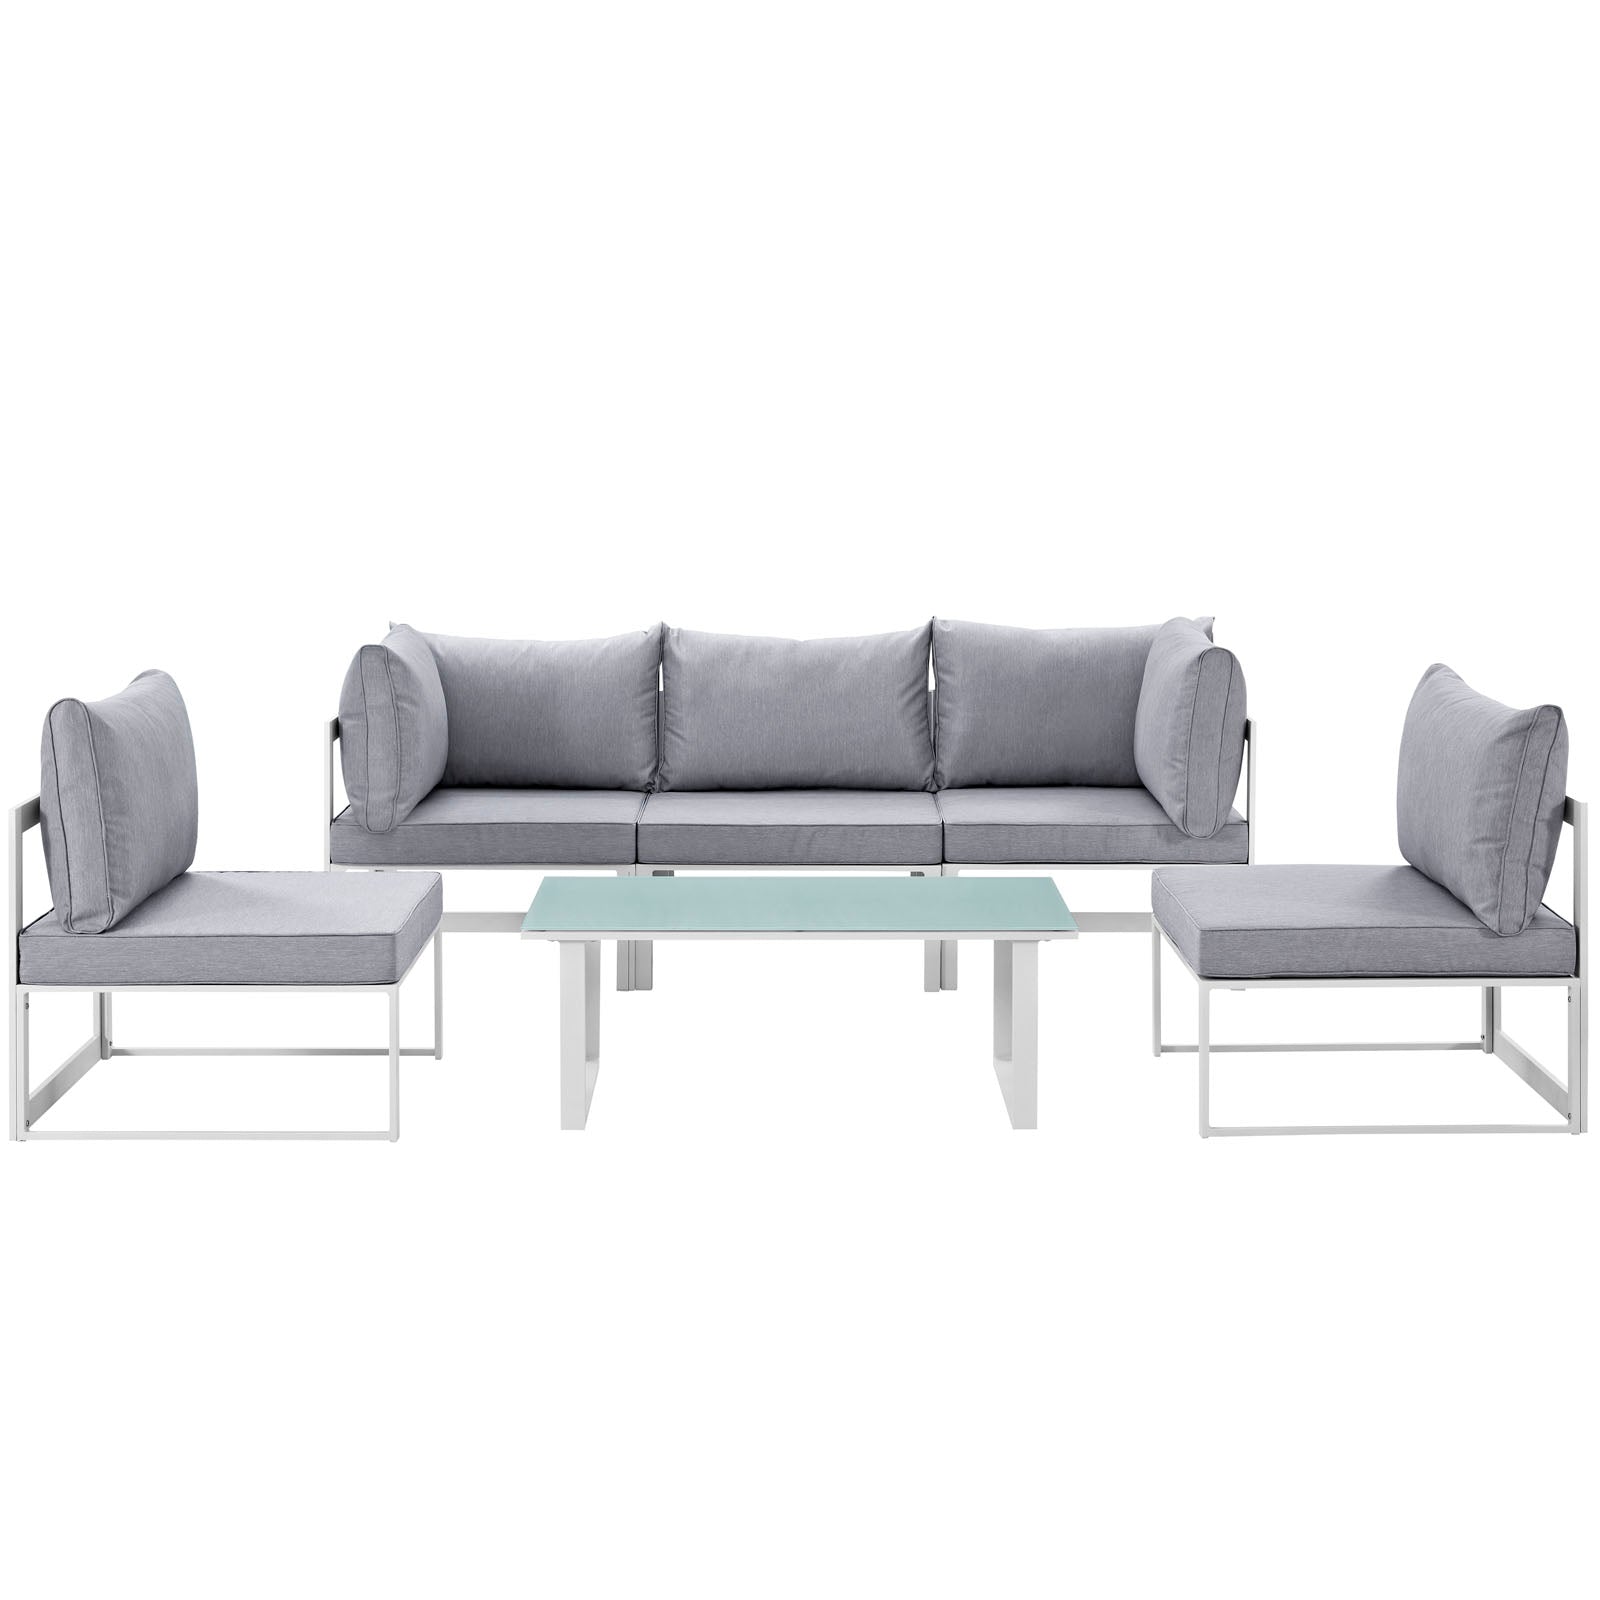 Modway Outdoor Conversation Sets - Fortuna 6 Piece Outdoor Patio Sectional Sofa Set White & Gray